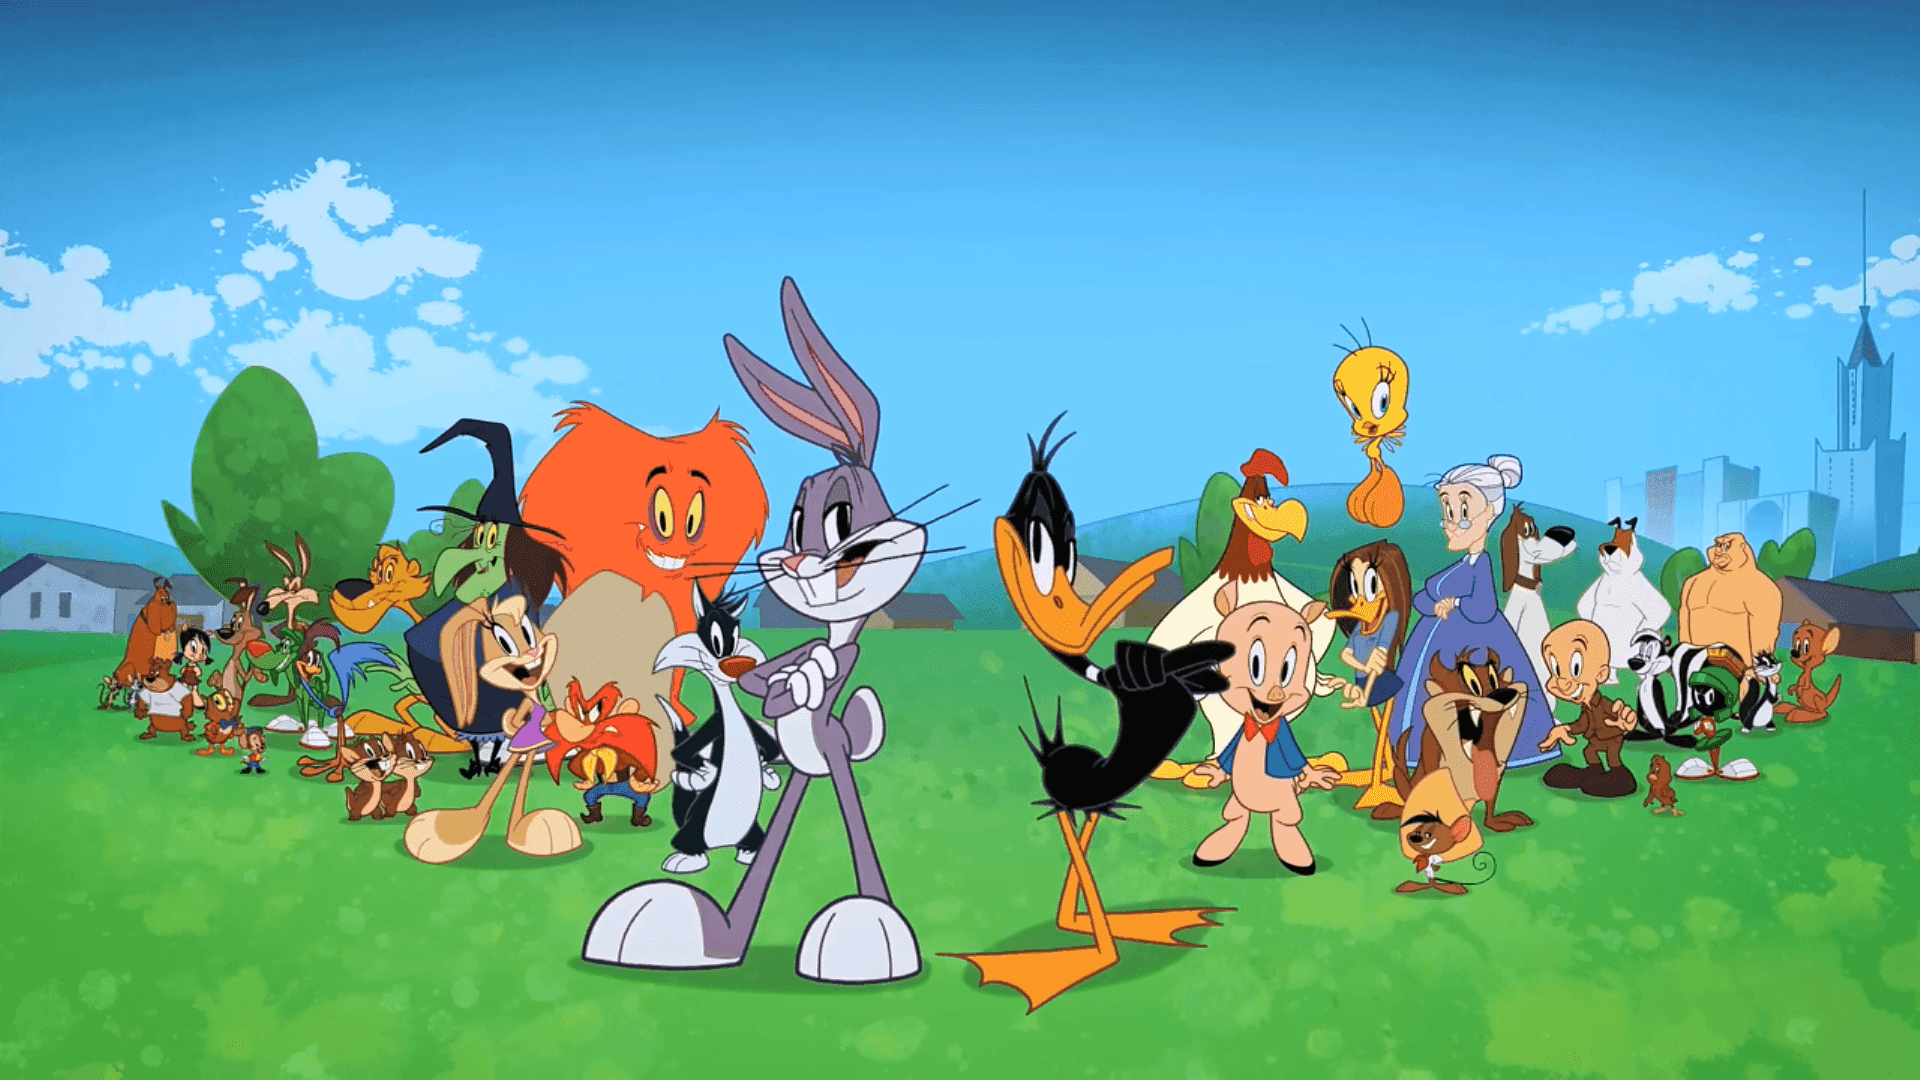 200+] Looney Tunes Backgrounds